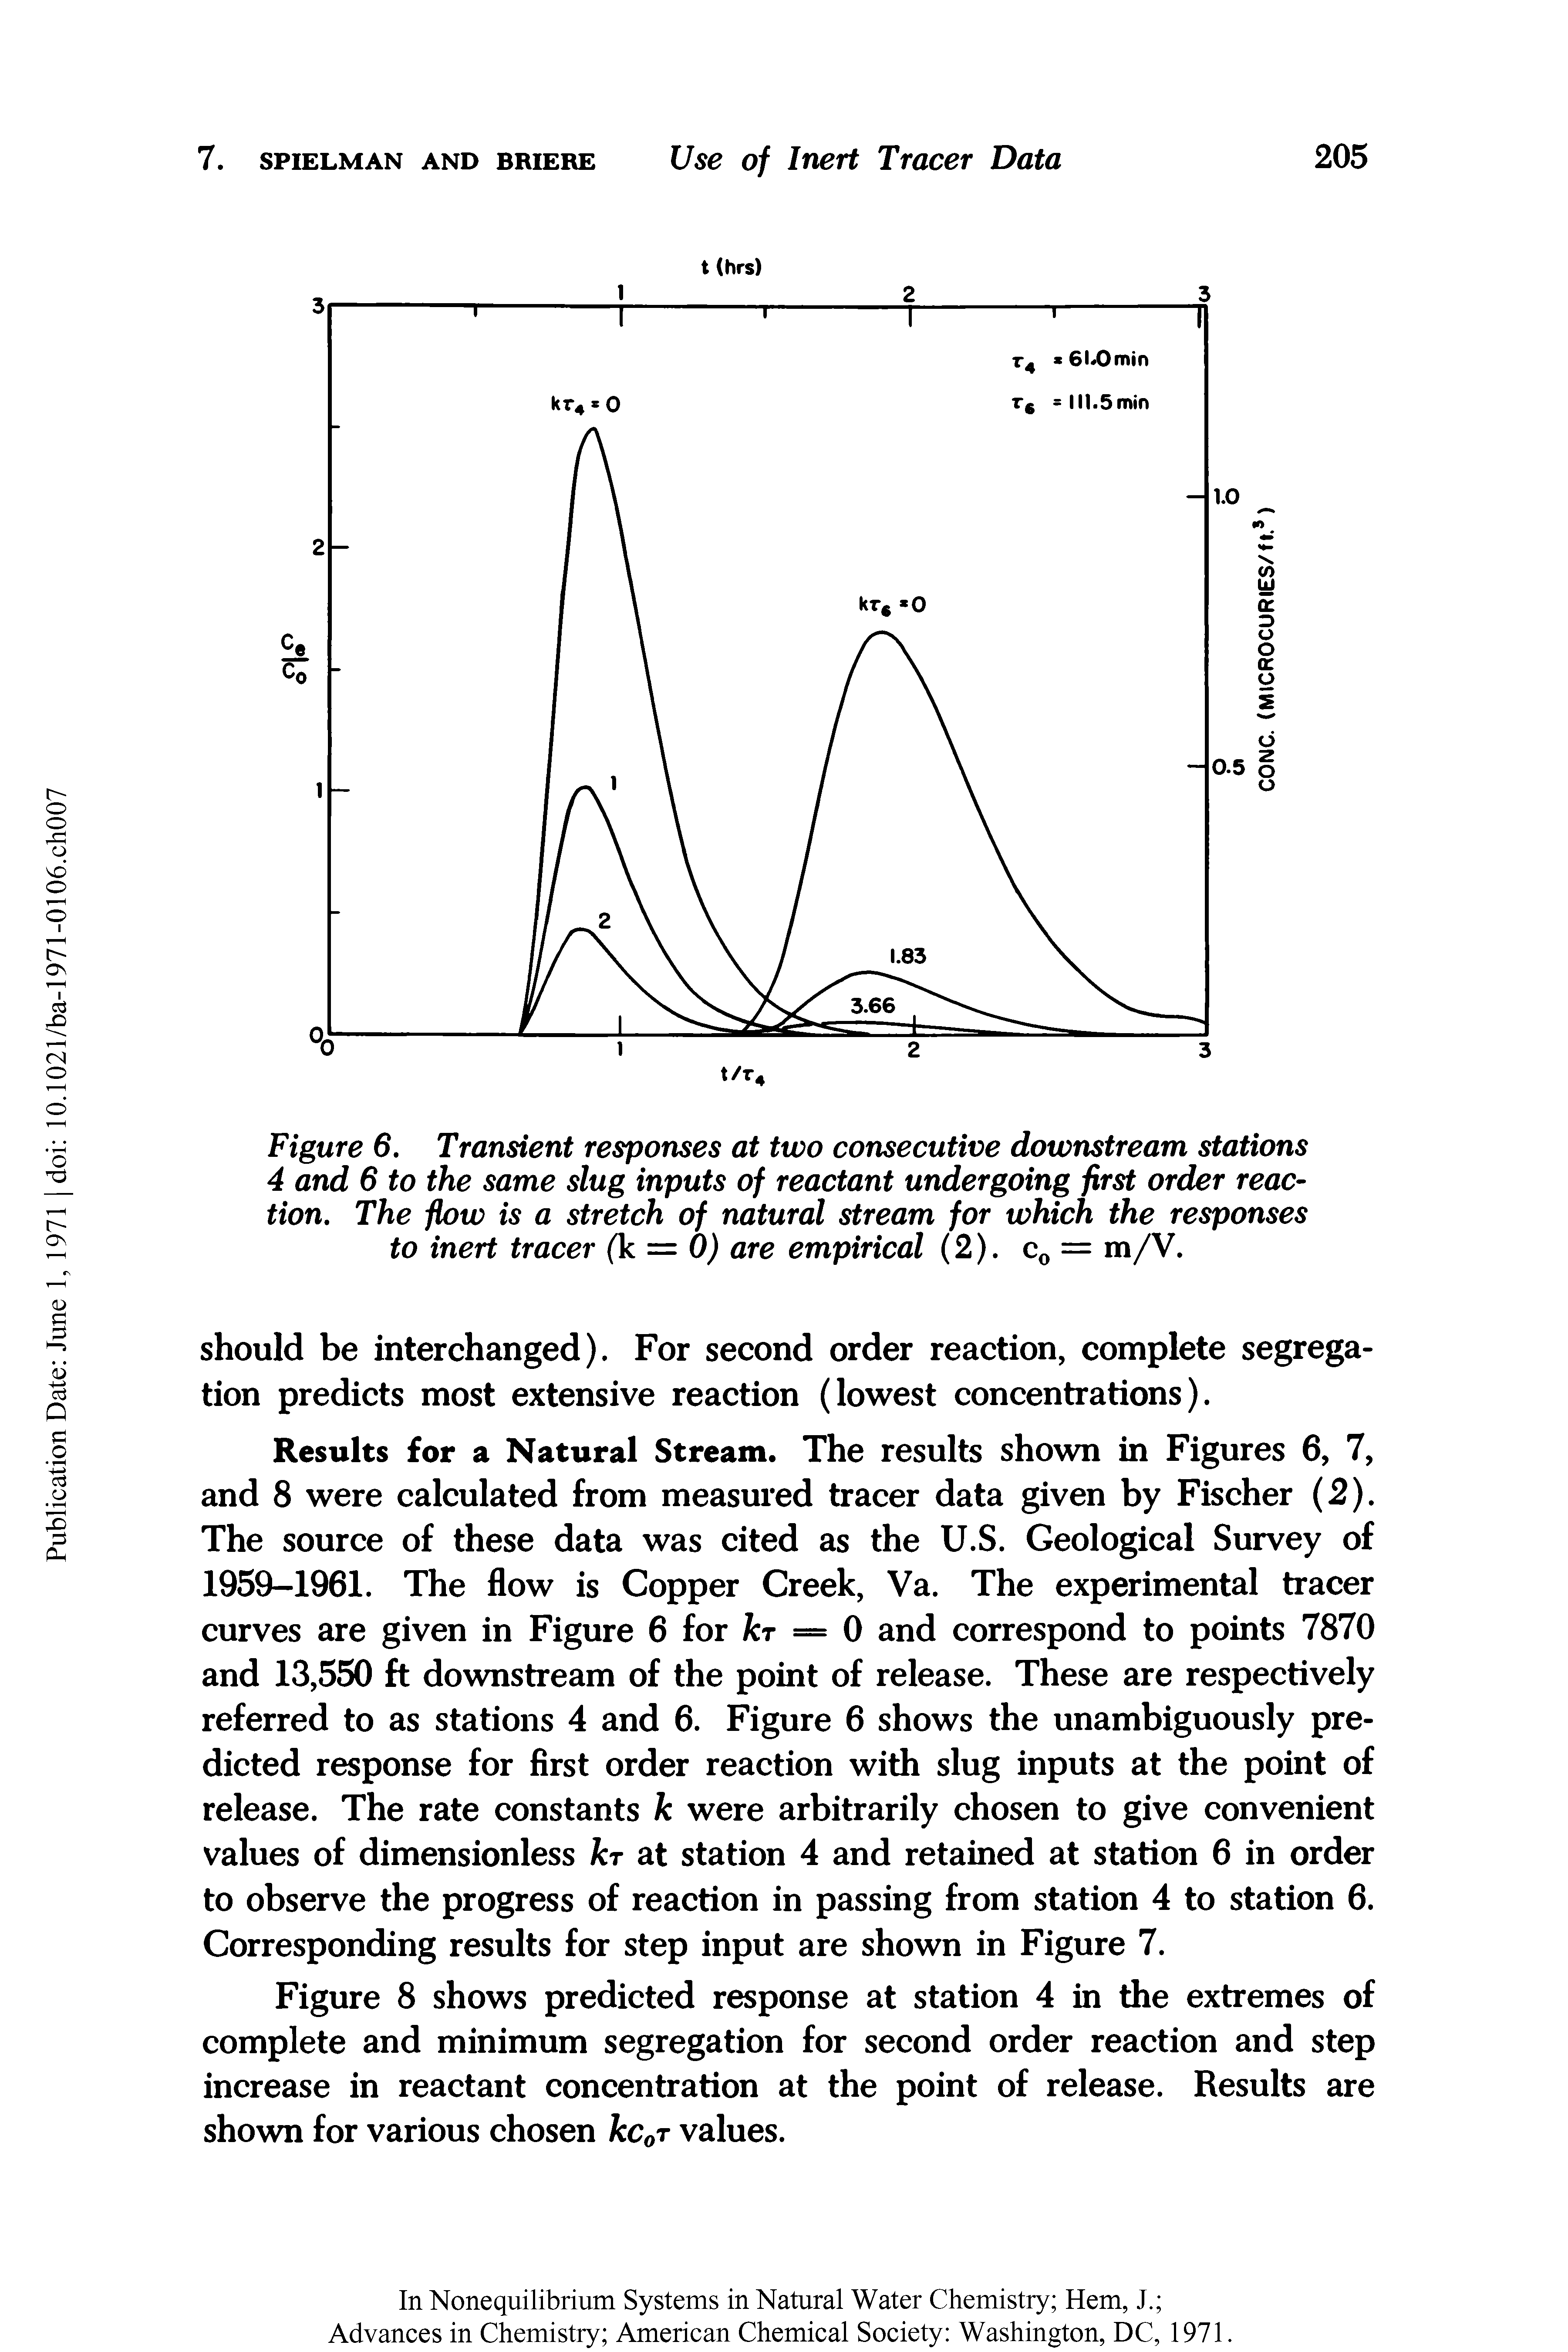 Figure 6. Transient responses at two consecutive downstream stations 4 and 6 to the same slug inputs of reactant undergoing first order reaction. The flow is a stretch of natural stream for which the responses to inert tracer (k = 0) are empirical (2). c0 = m/V.